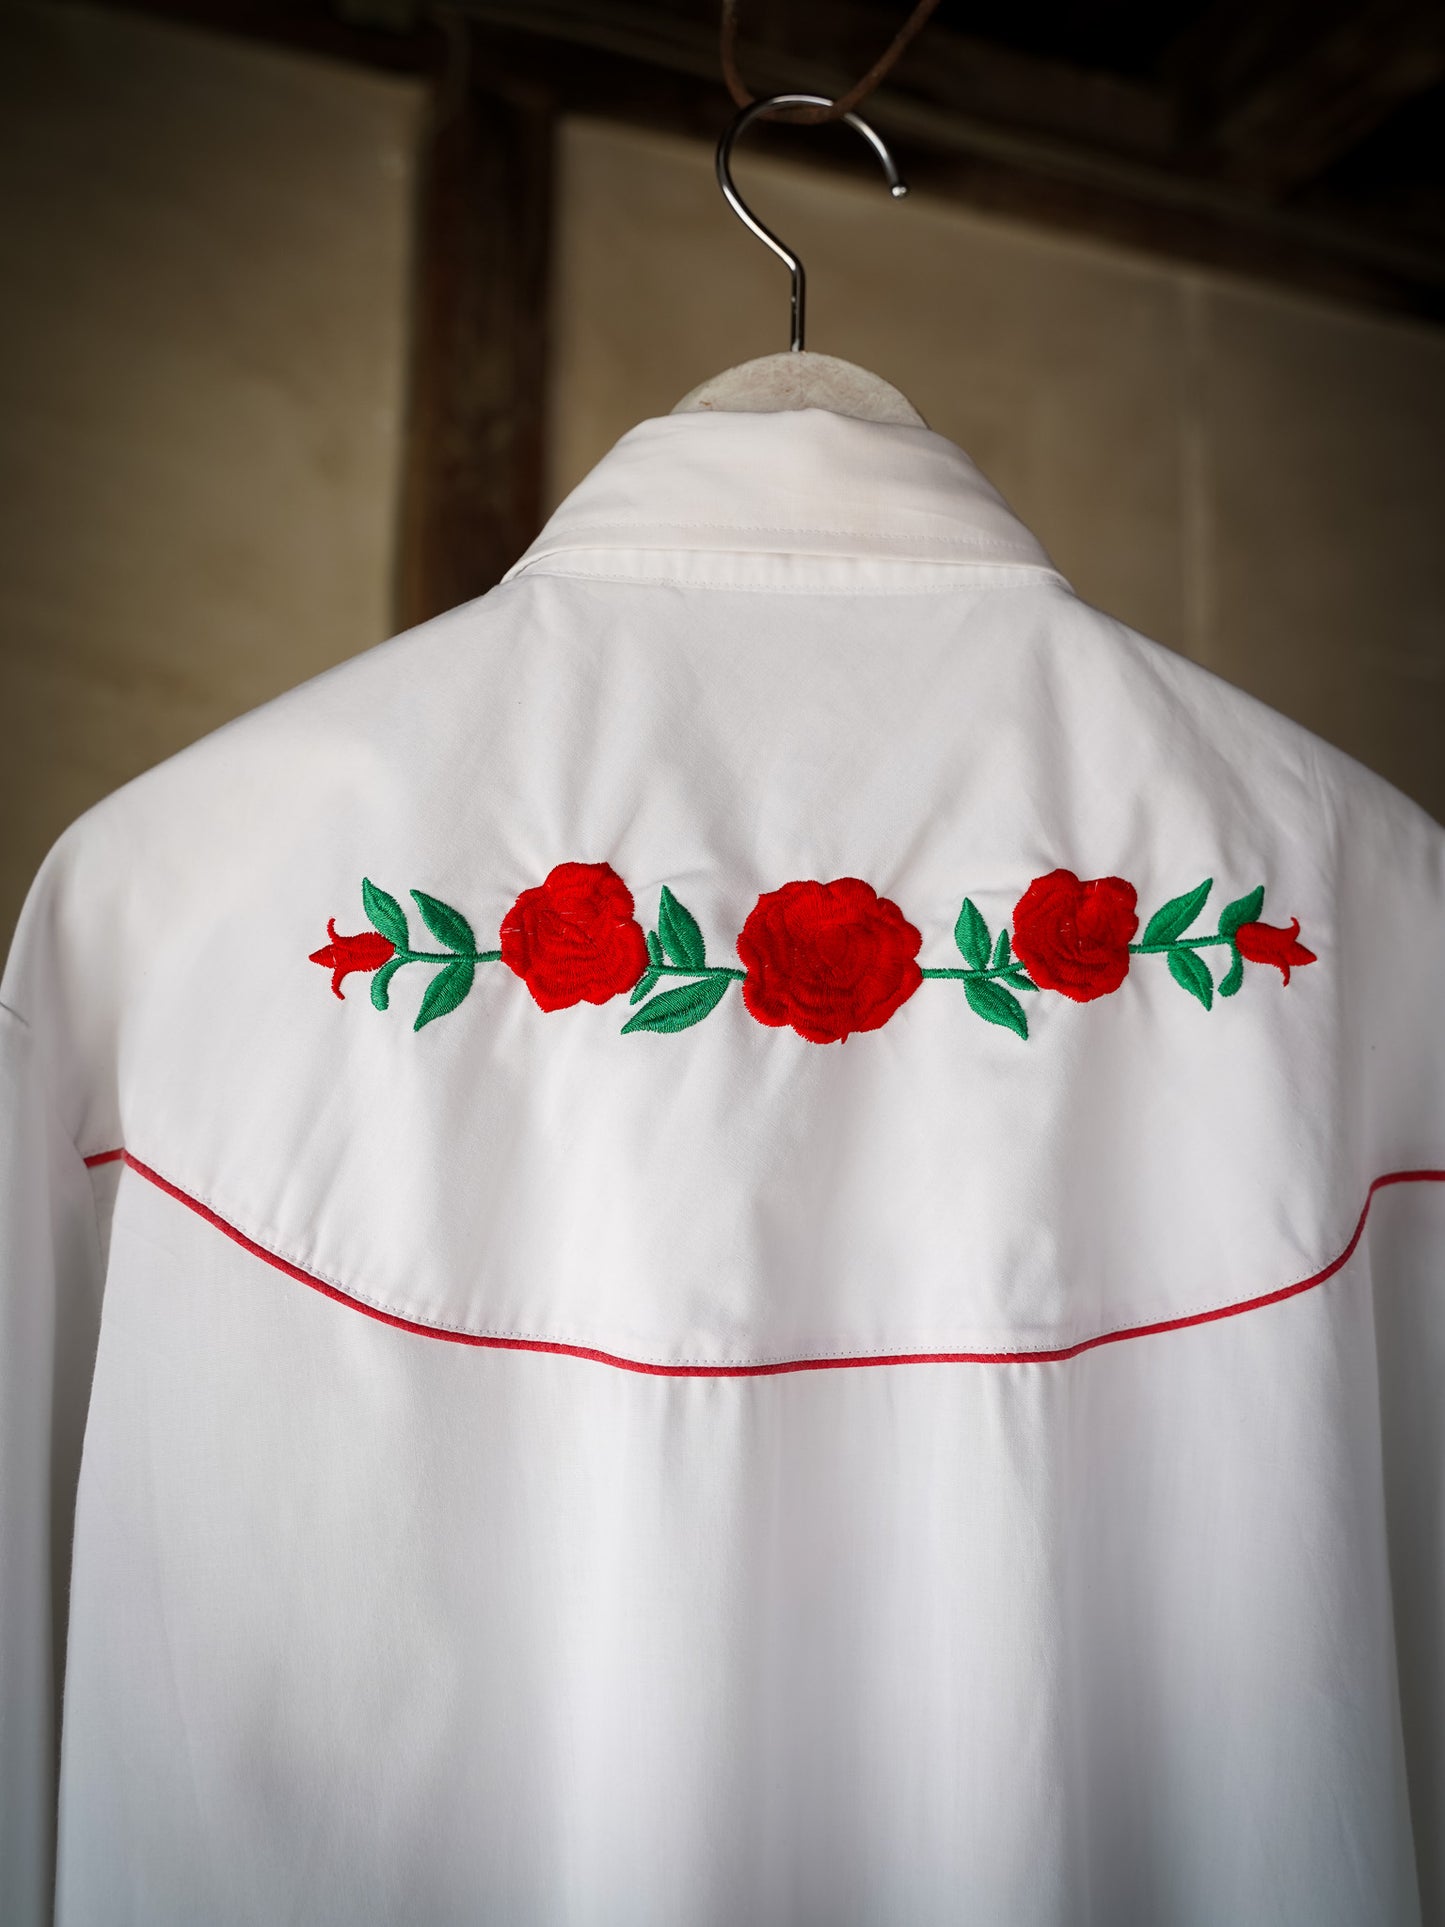 1980s~ Vintage Rose Embroidery Western Shirts